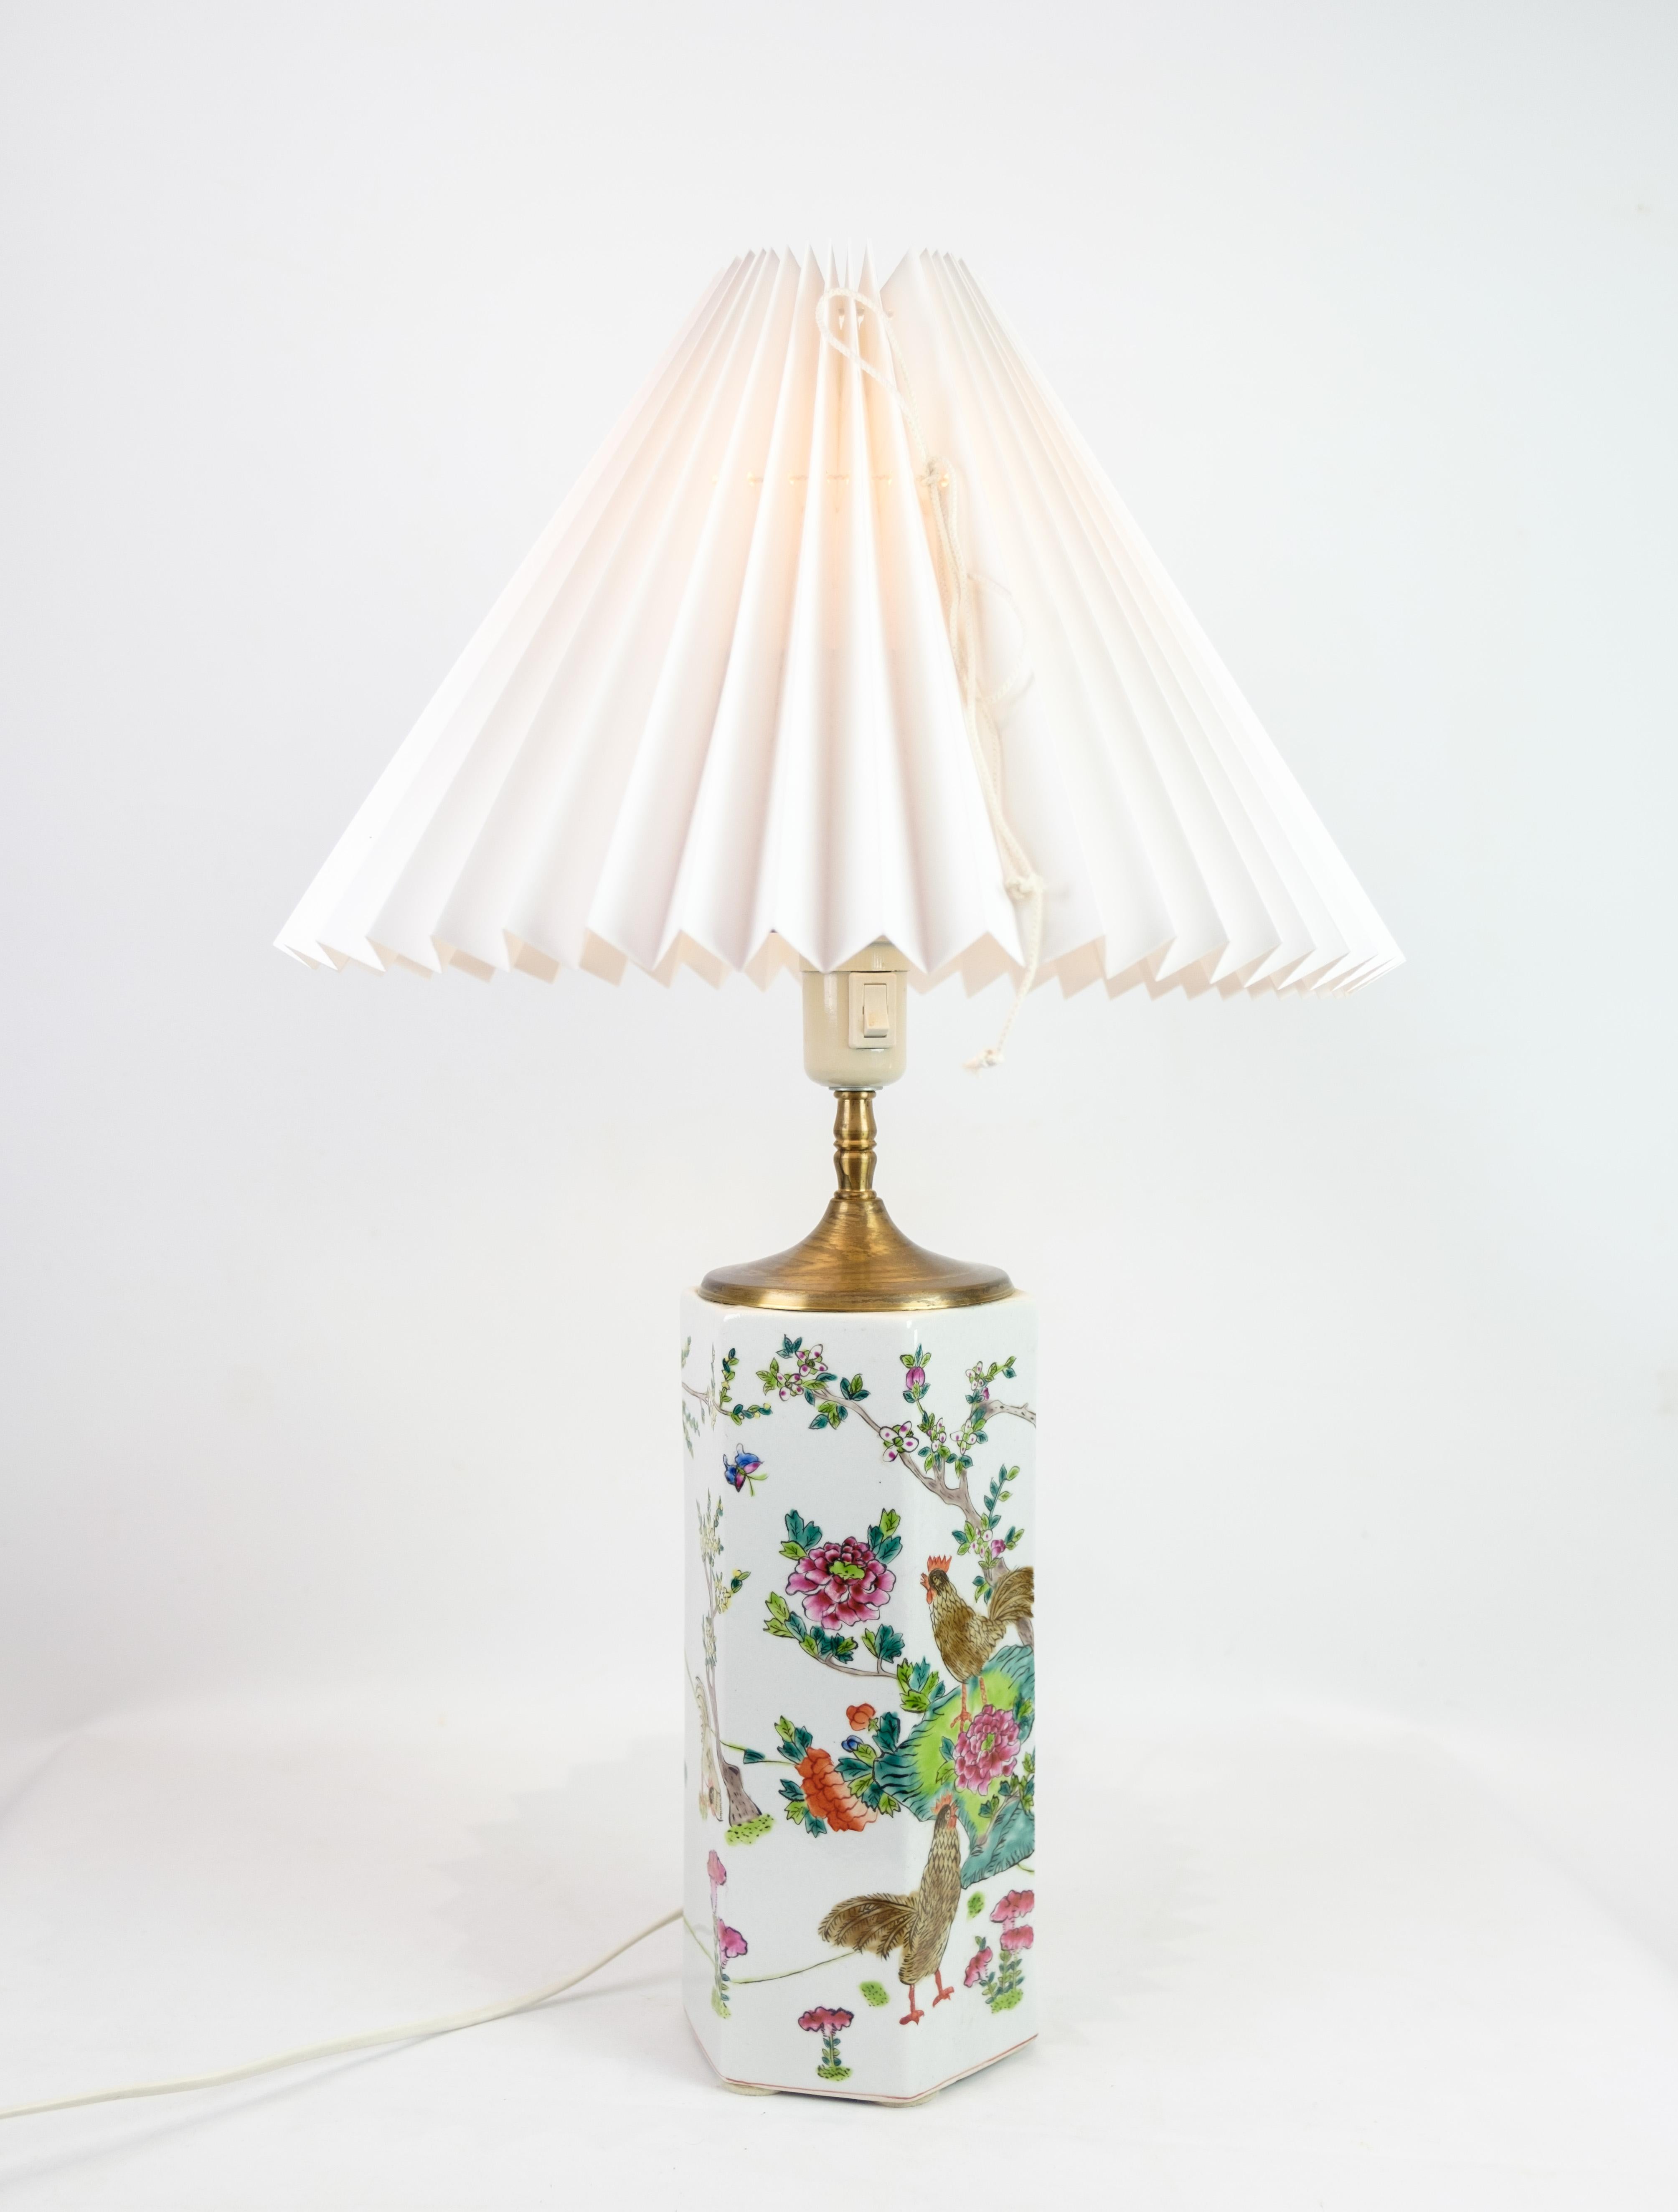 Chinese Table Lamp Made In Porcelain With White Shade From 1920s im Angebot 5